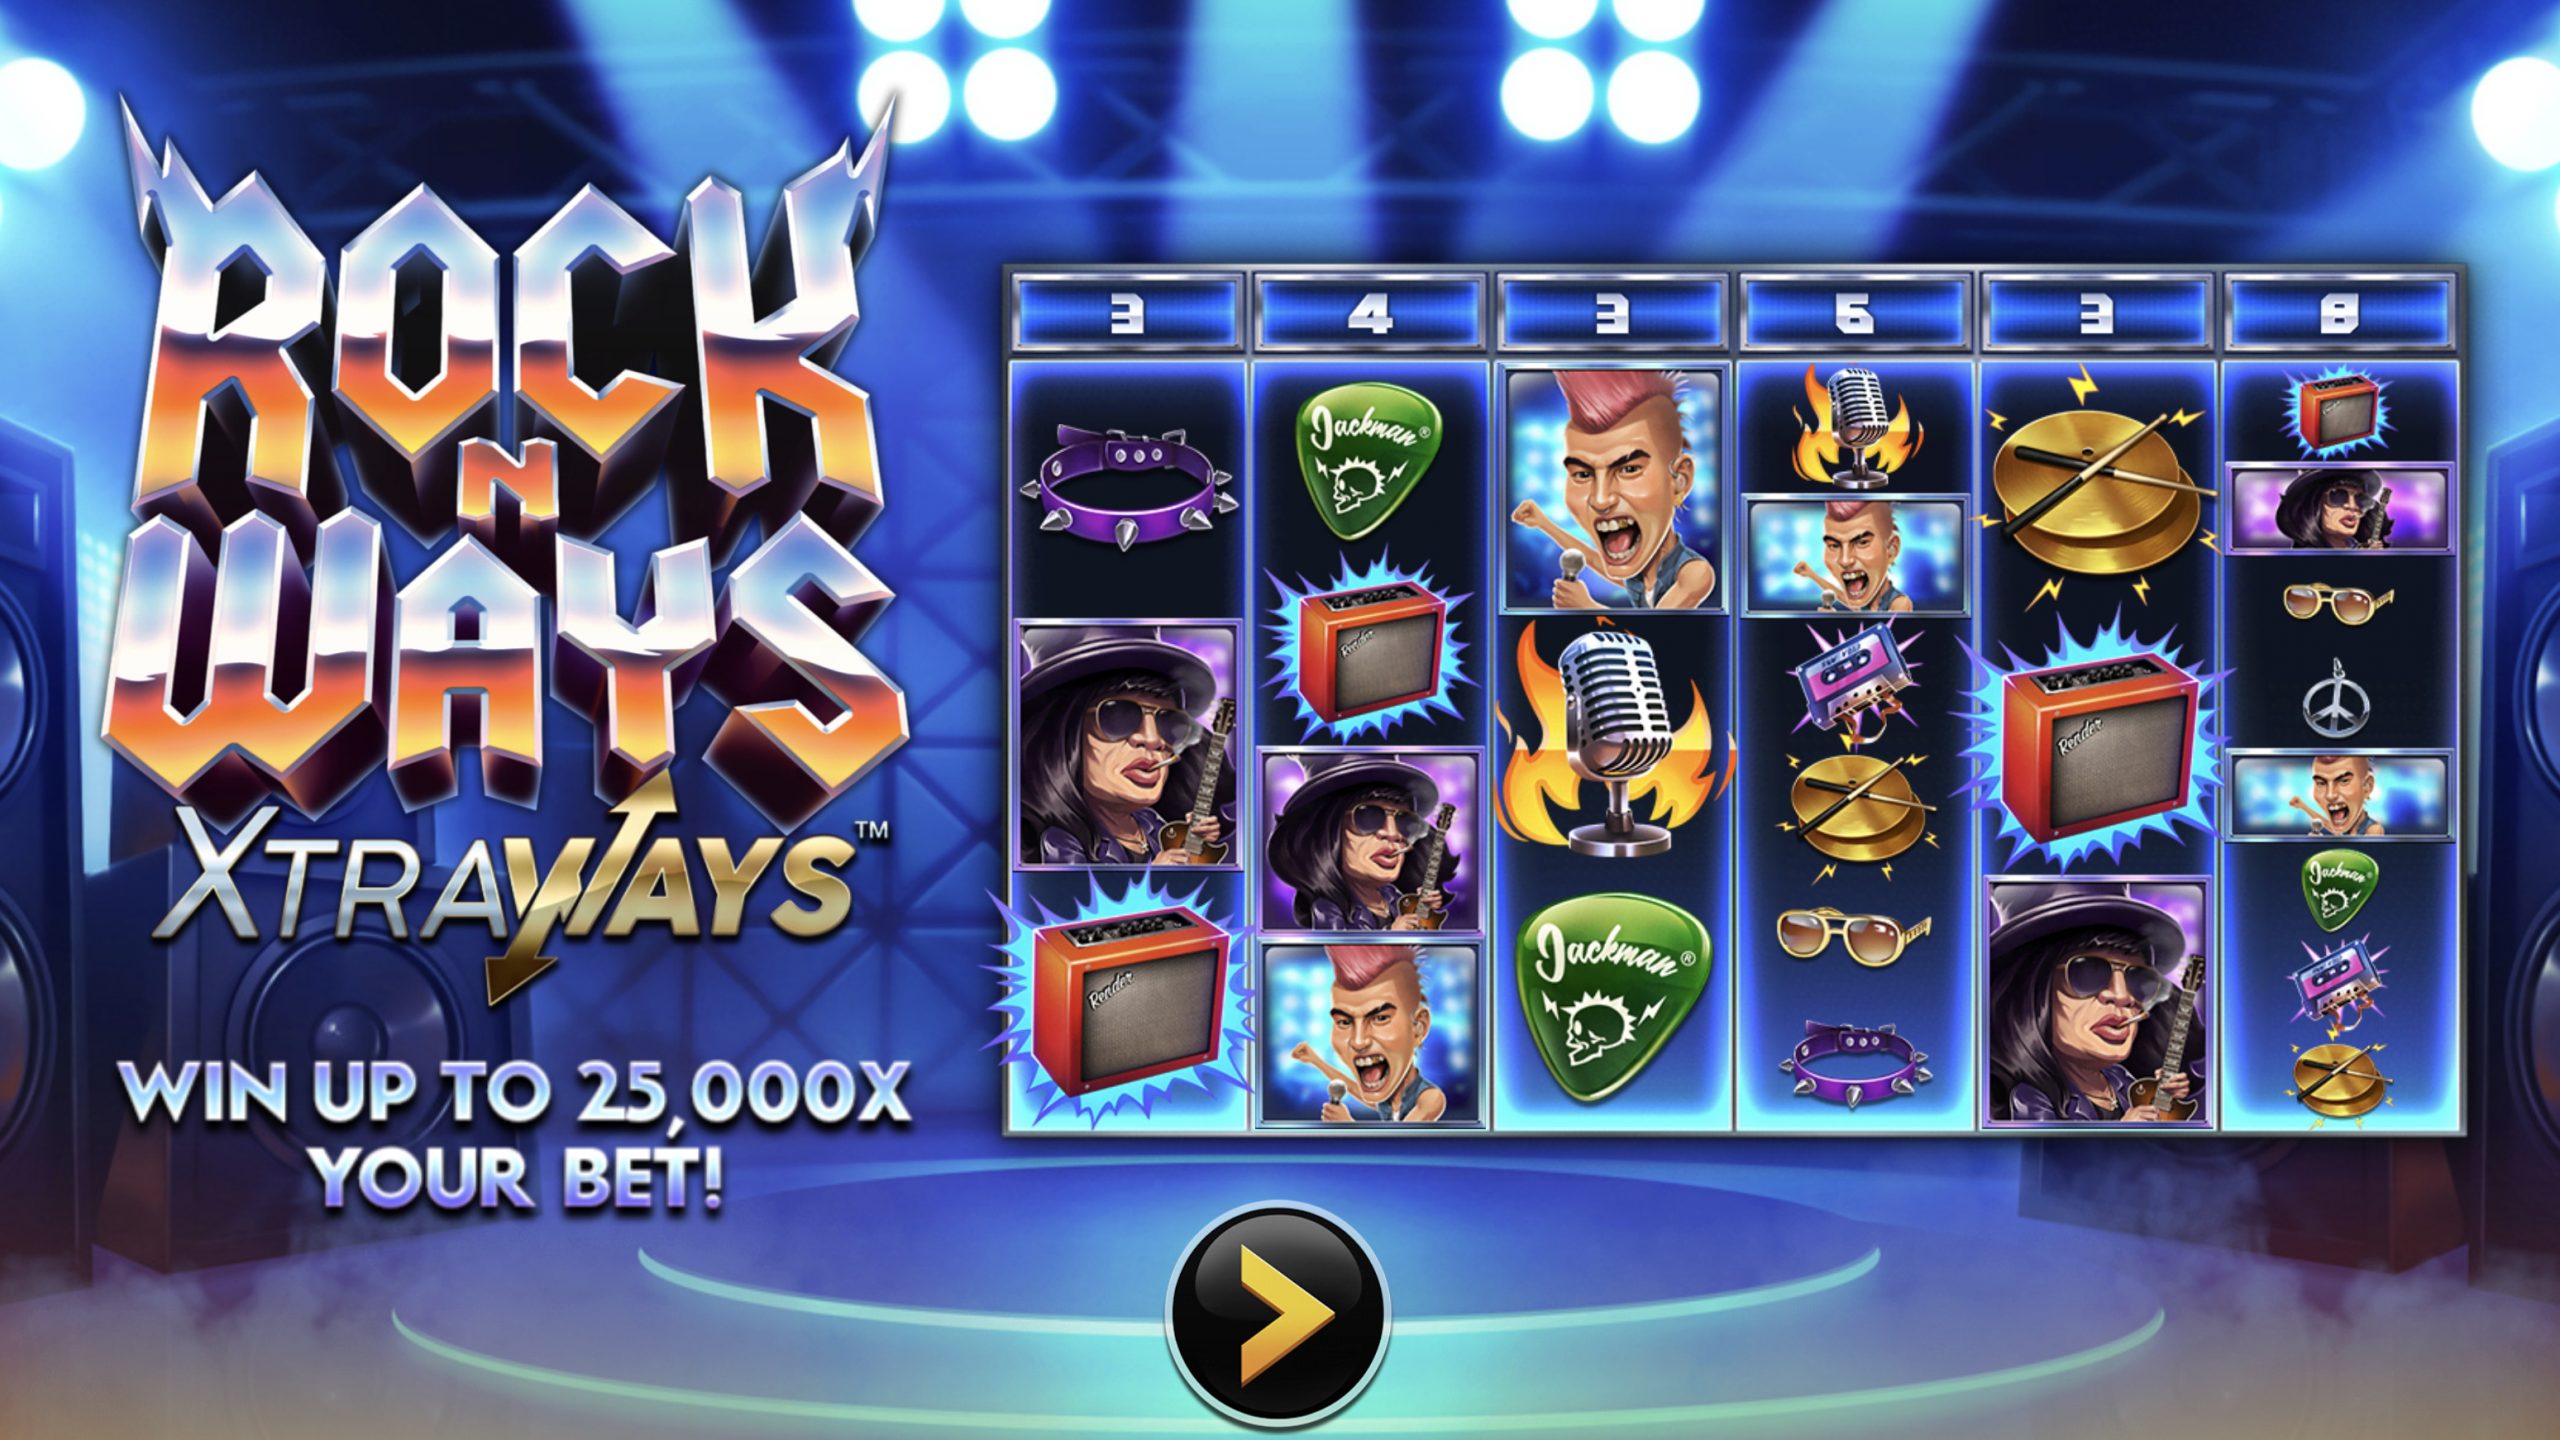 Rock n’ Ways XtraWays is a 6x3-8 video slot with 729 to 262,144 ways to win incorporating a maximum win potential of up to x25,000 the bet.